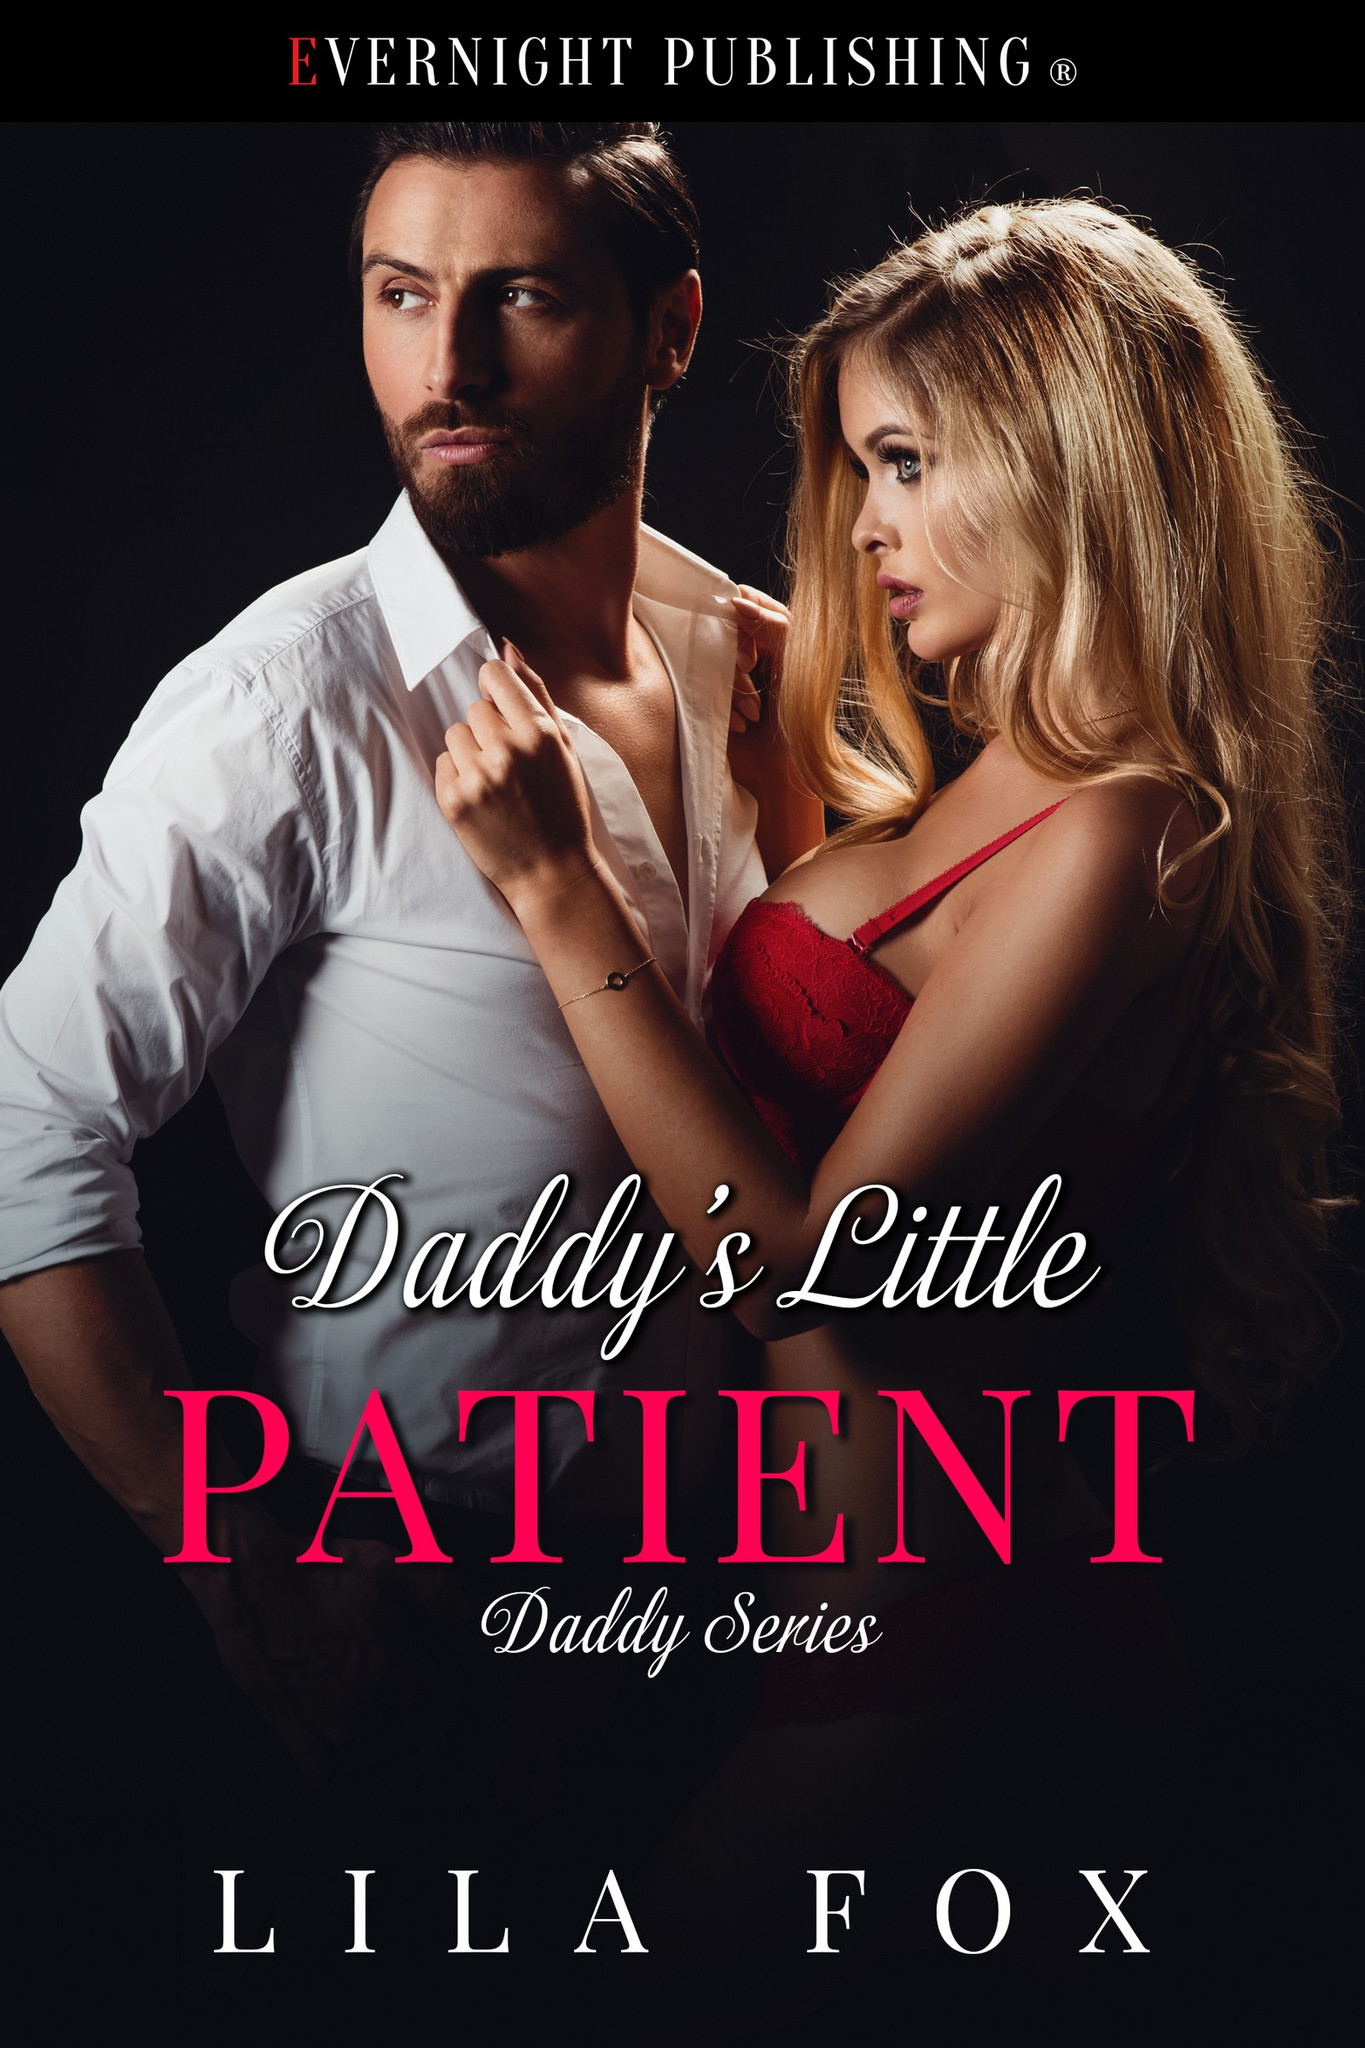 Daddys Little Patient by Lila